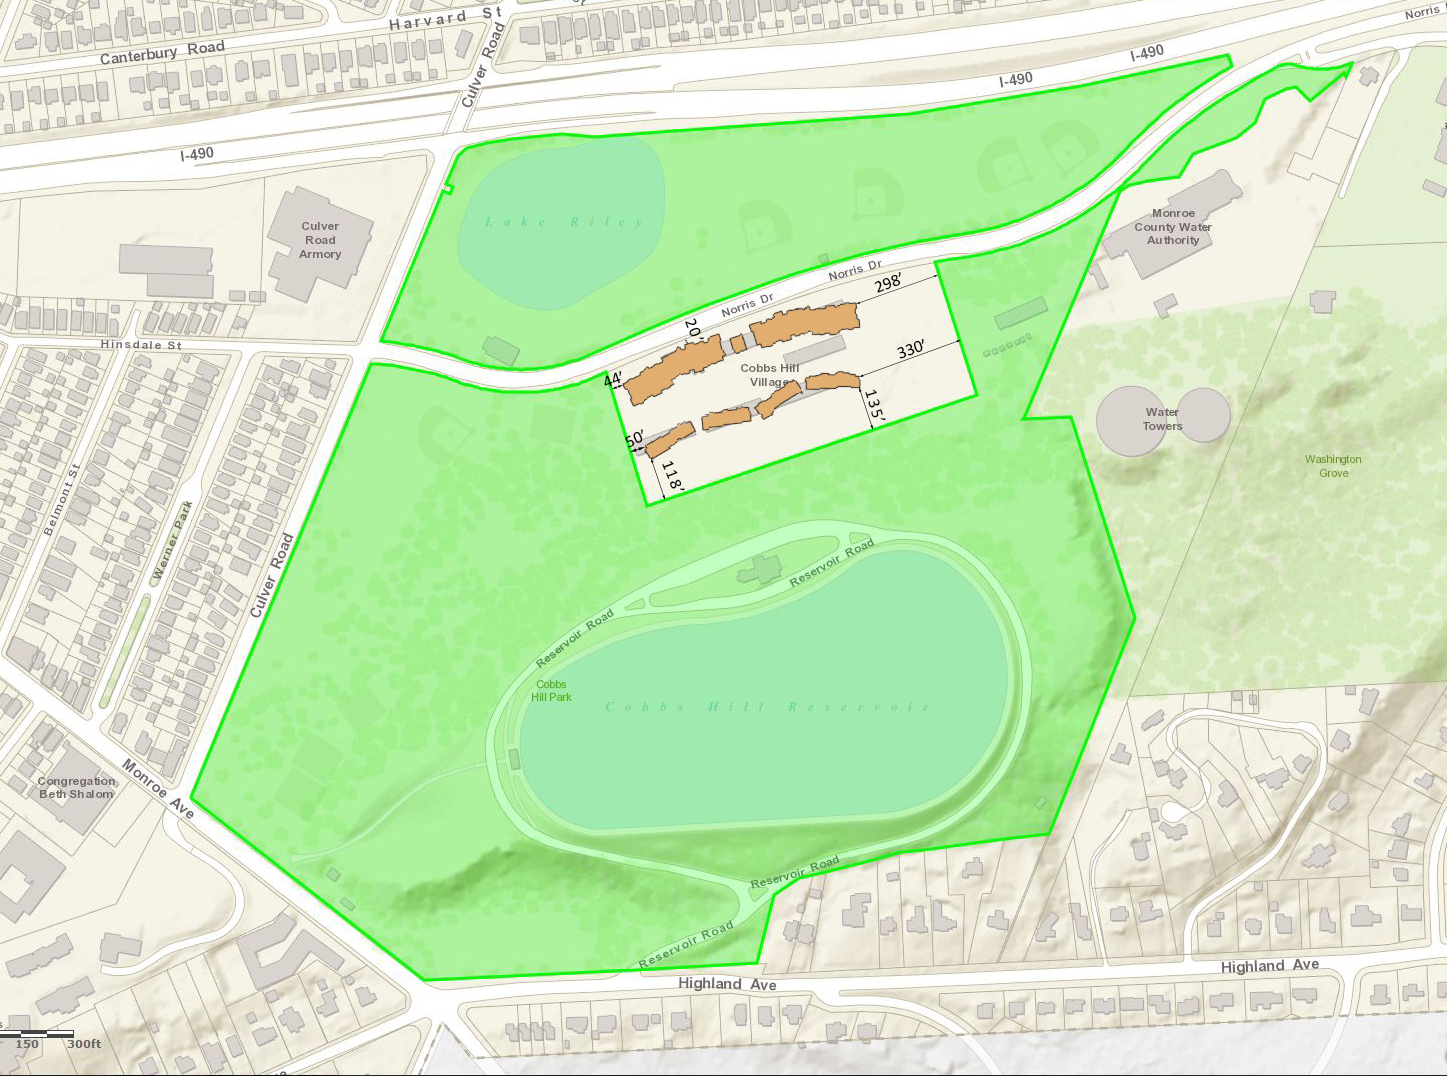 Revised Cobbs Hill Site Plan 4 4 2018